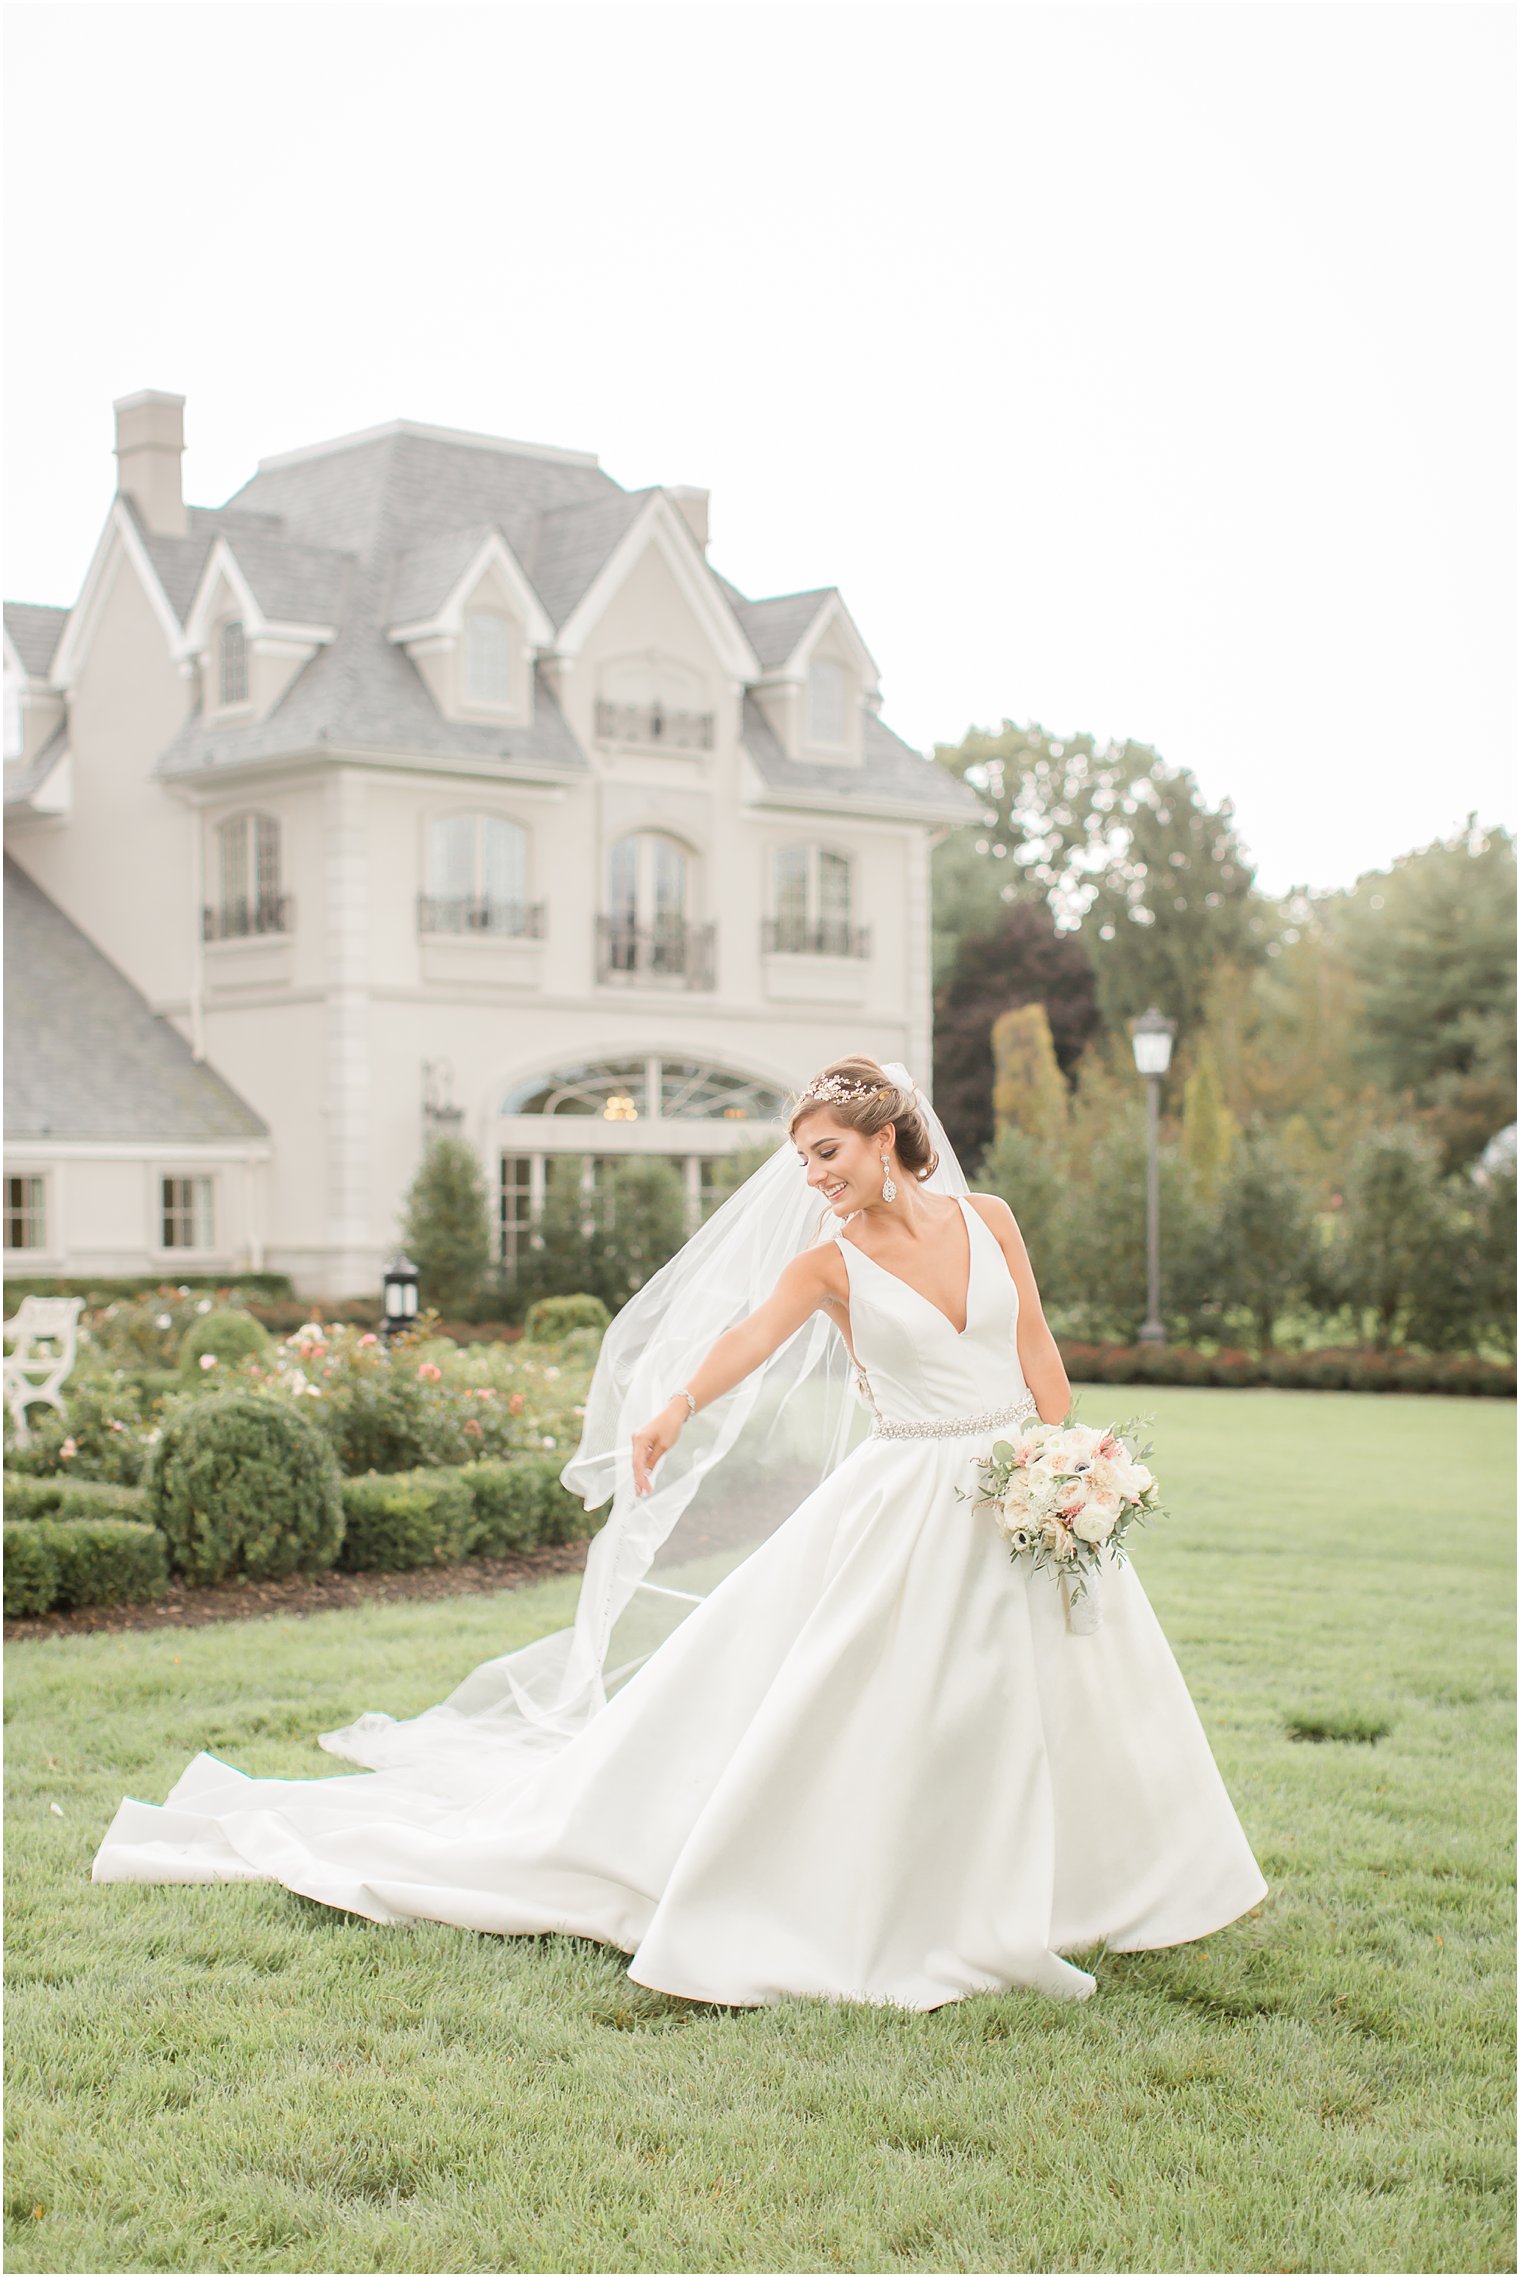 Windy day wedding at Park Chateau Estate